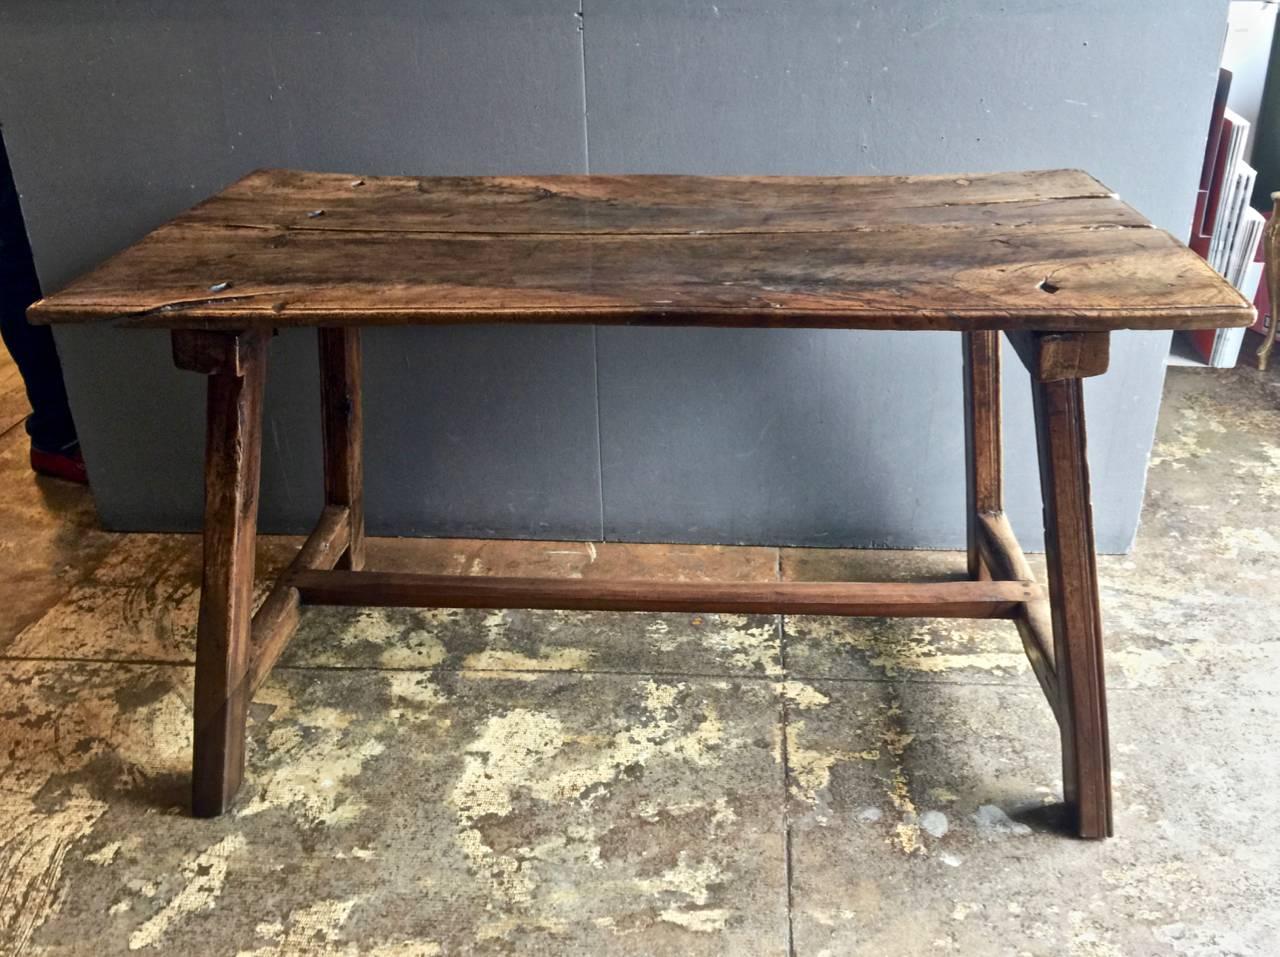 This is a beautifully patinated late 17th century Spanish trestle table. The table appears to retain its old soul-filled highly desirable original surface. The solid two board walnut top is secured to the leg supports with its original heavy